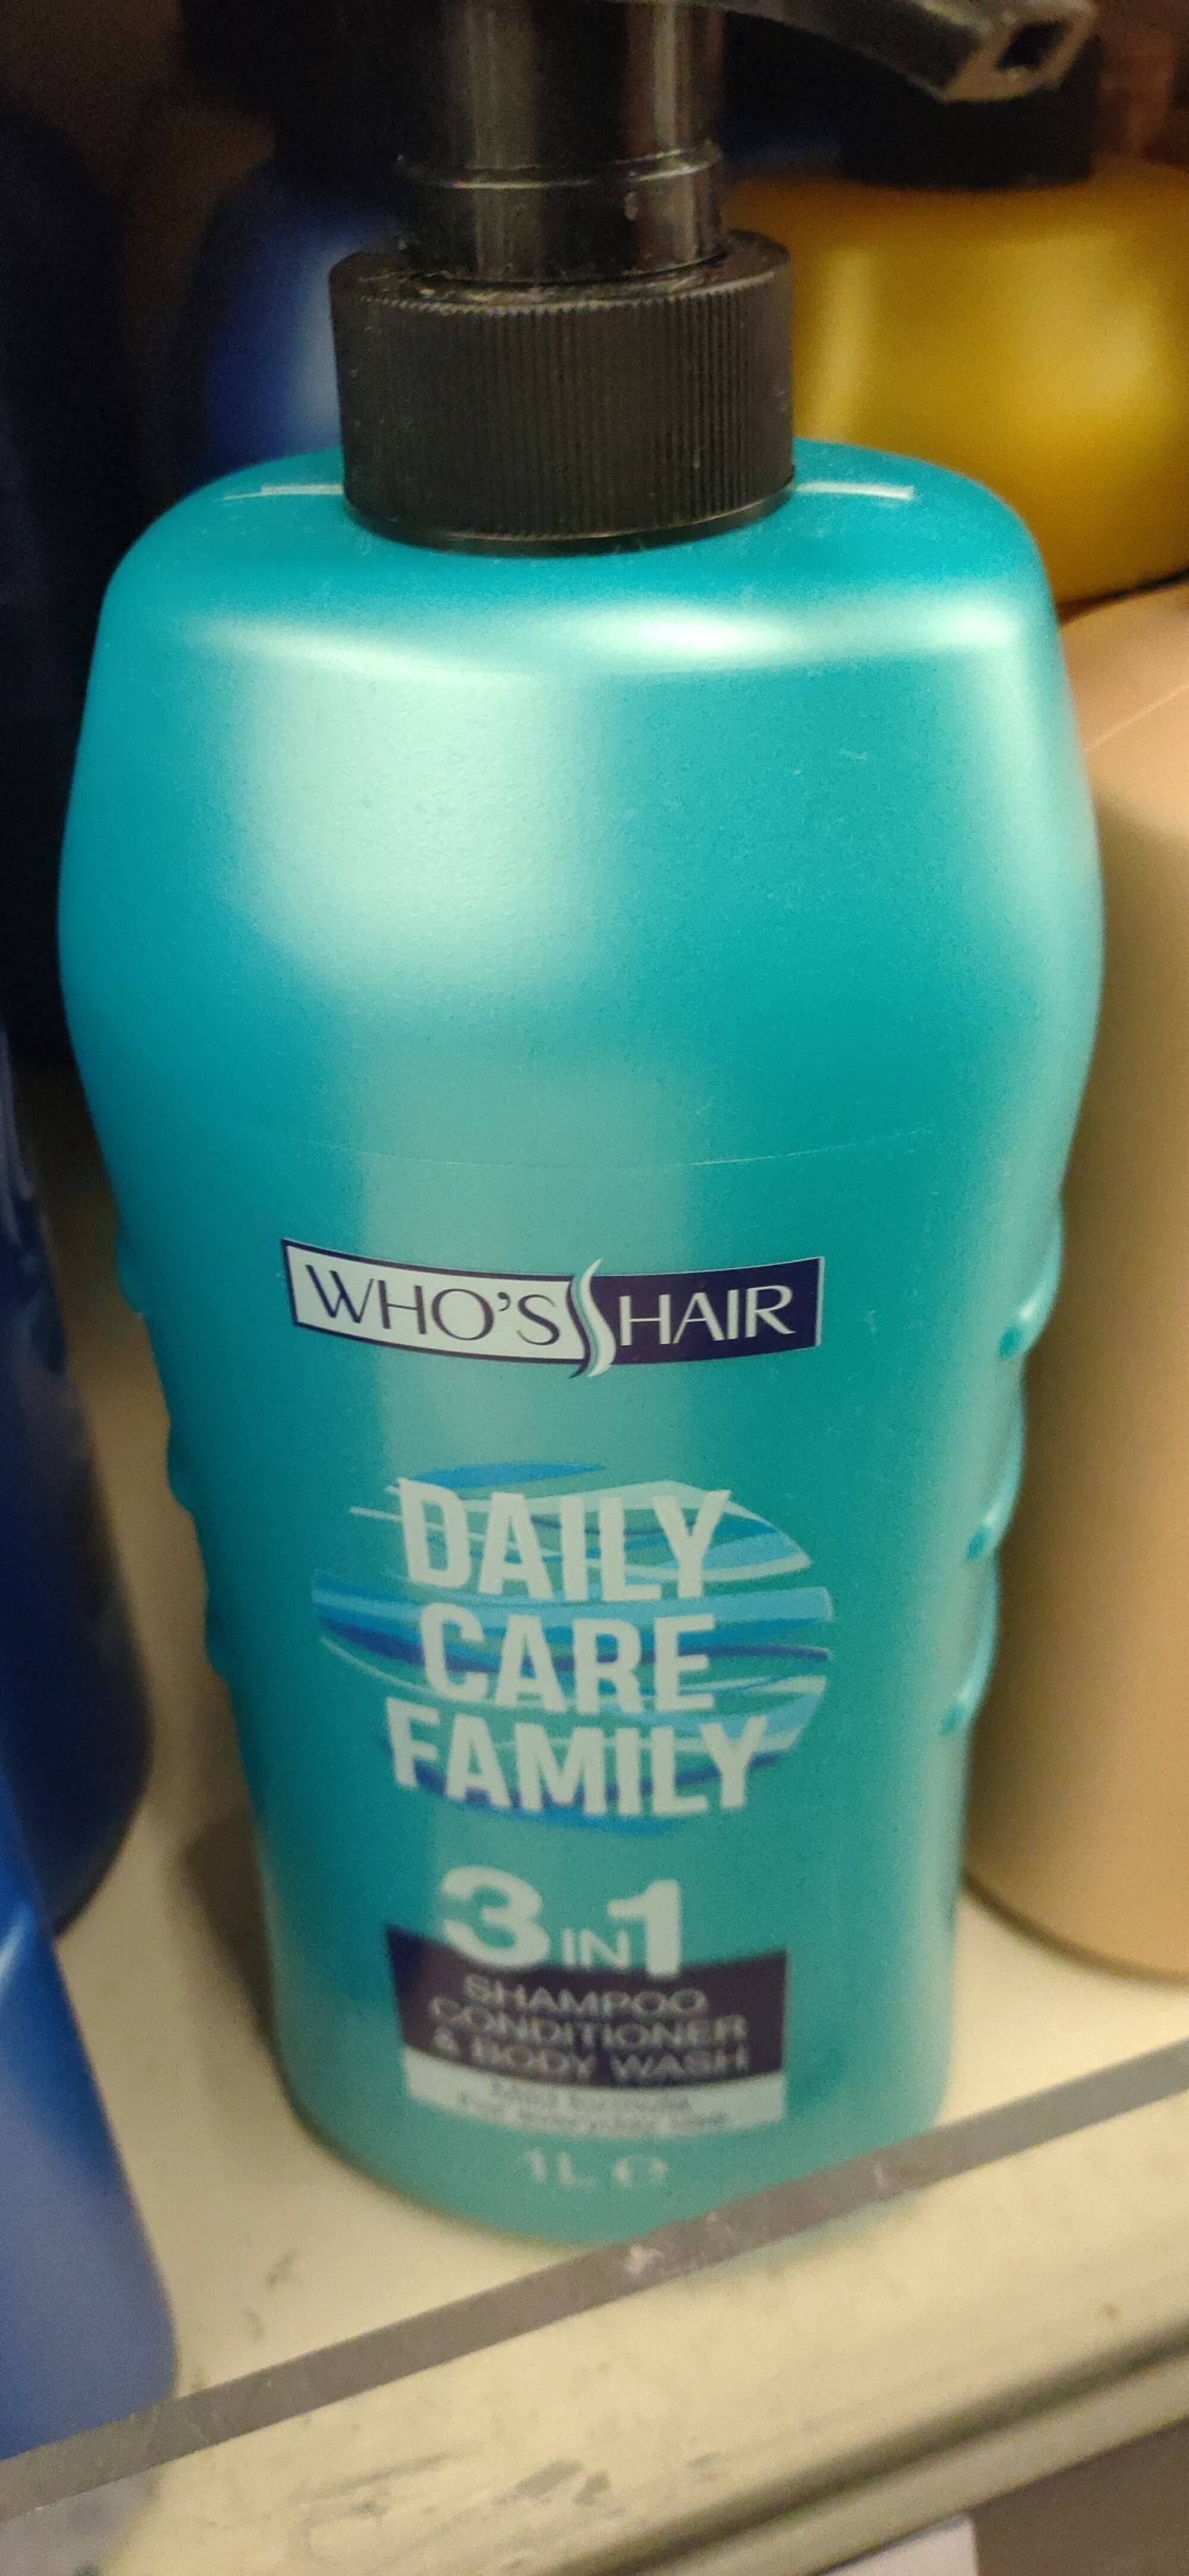 WHO'S HAIR ? - Daily care family - 3 in 1 shampoo, conditioner & body wash